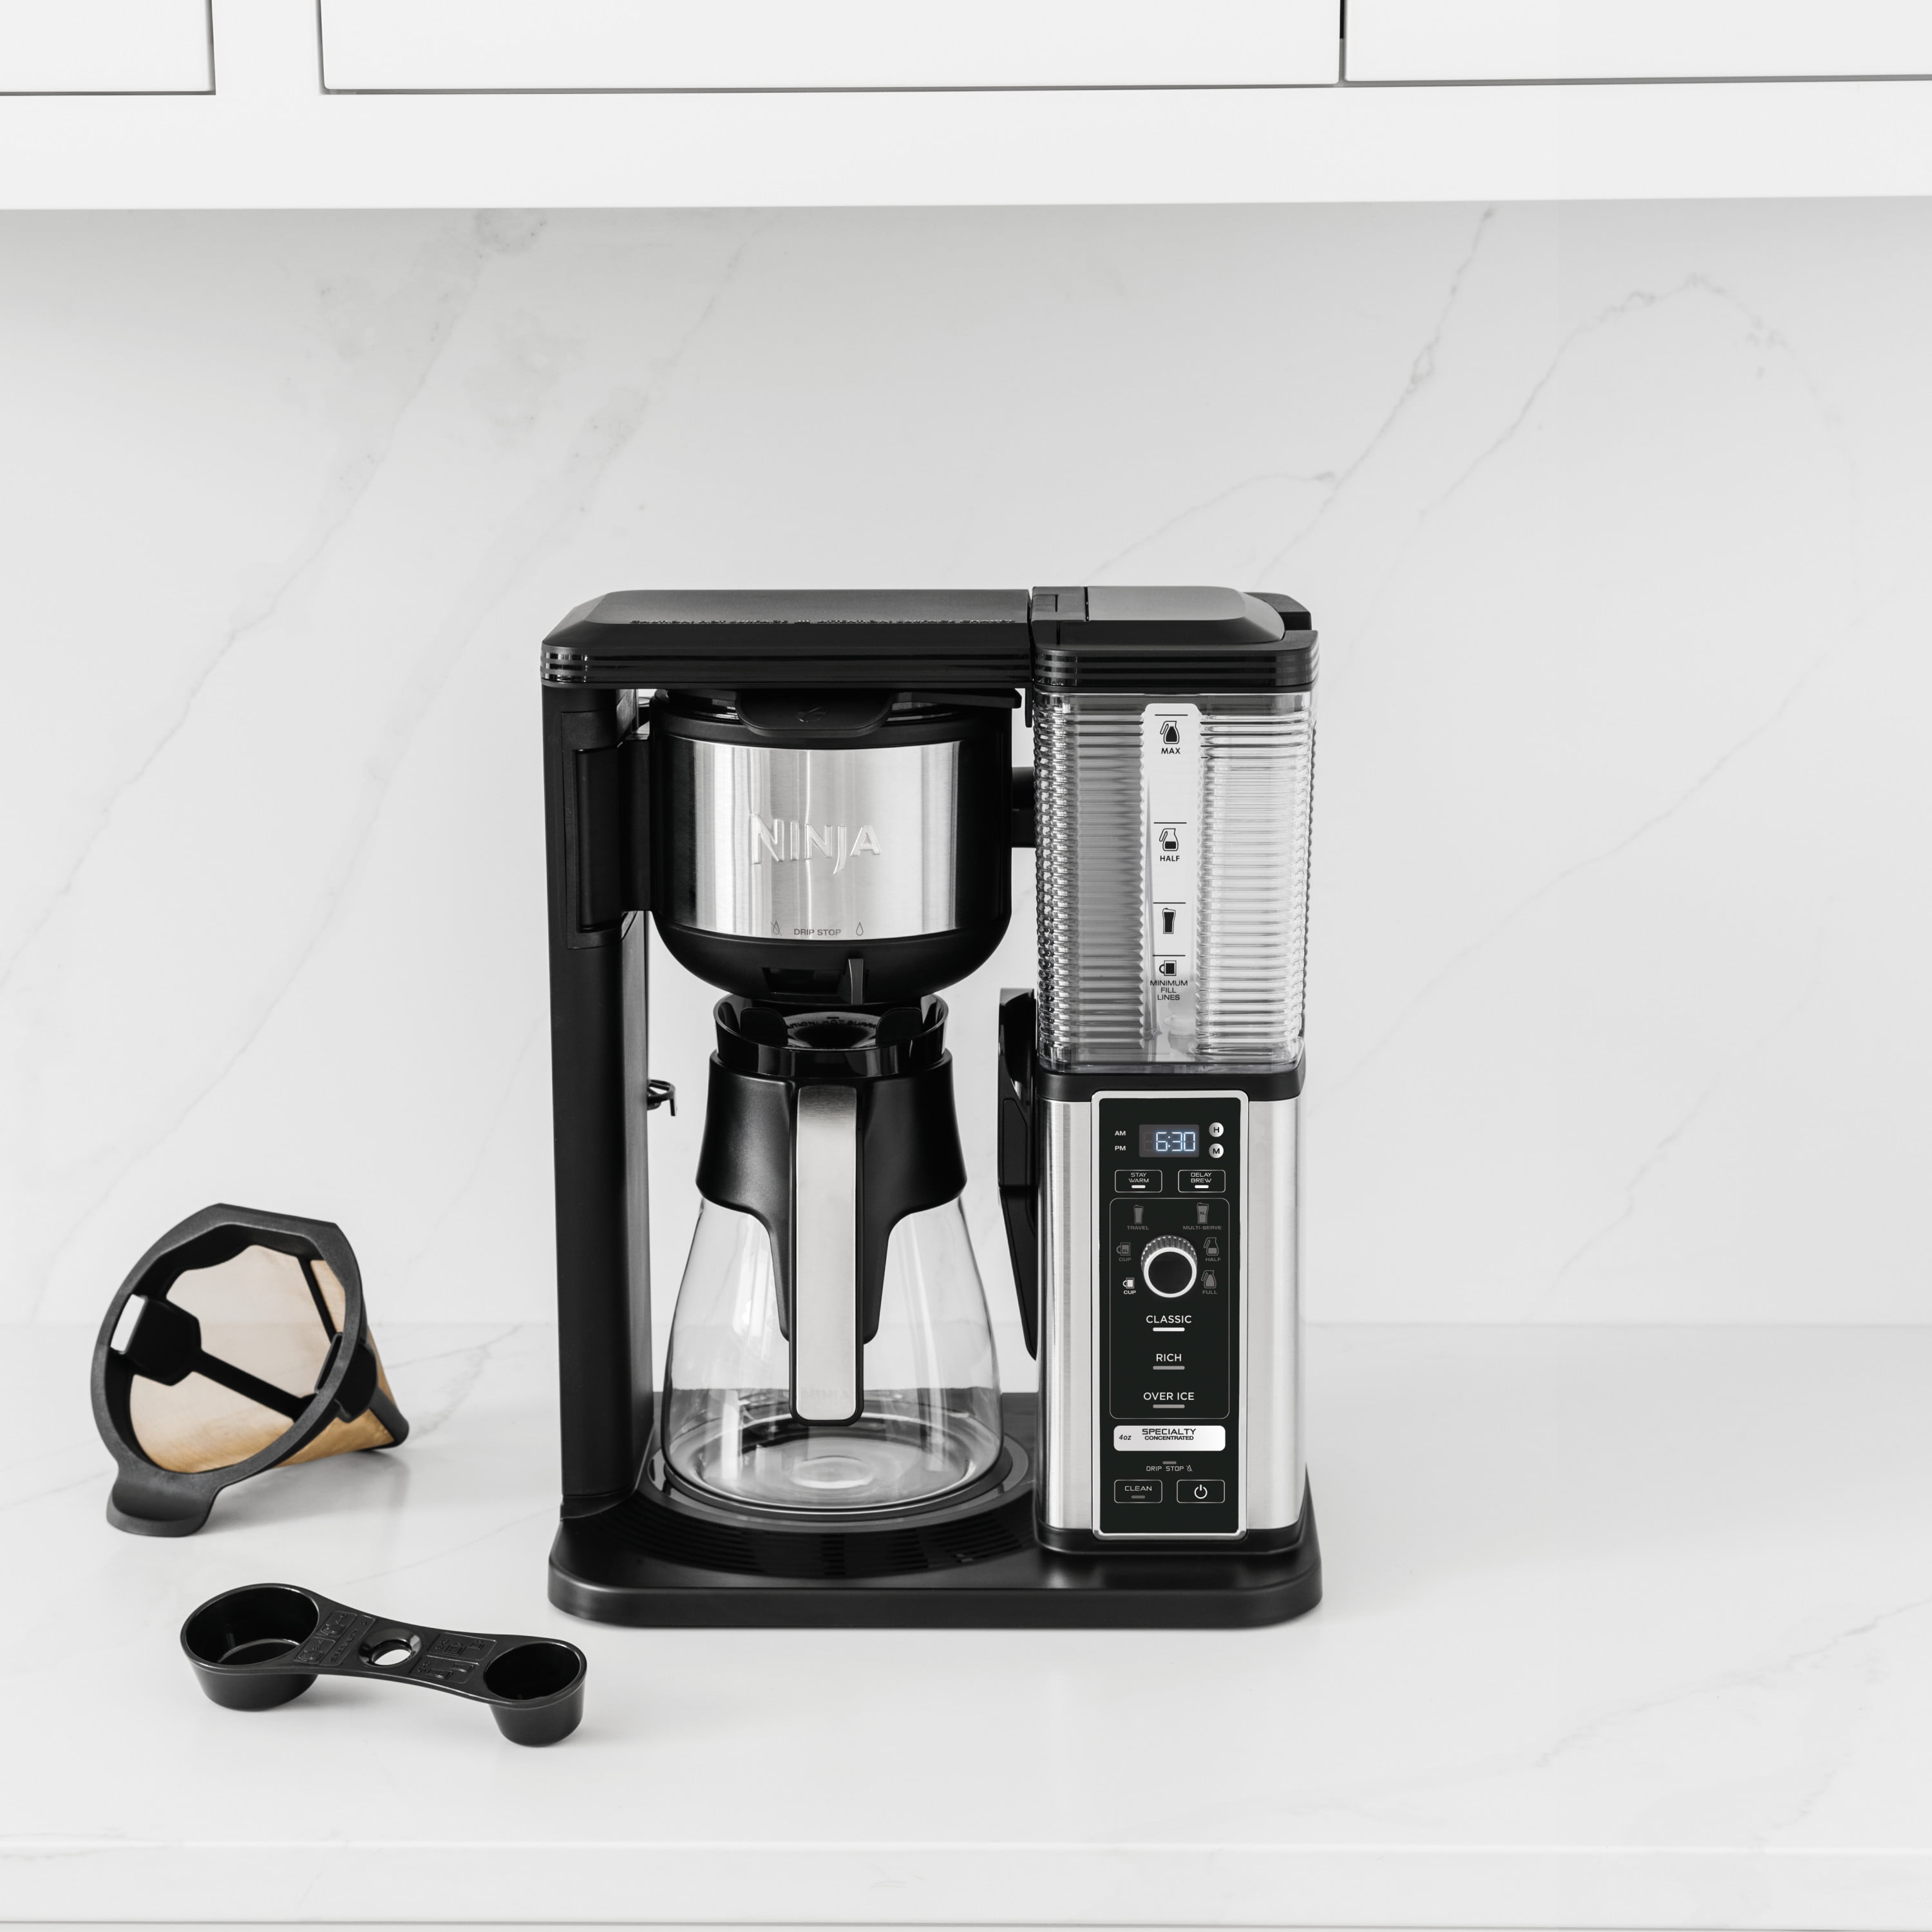 Ninja Specialty Coffee Maker (CM401) review: know what you're getting 